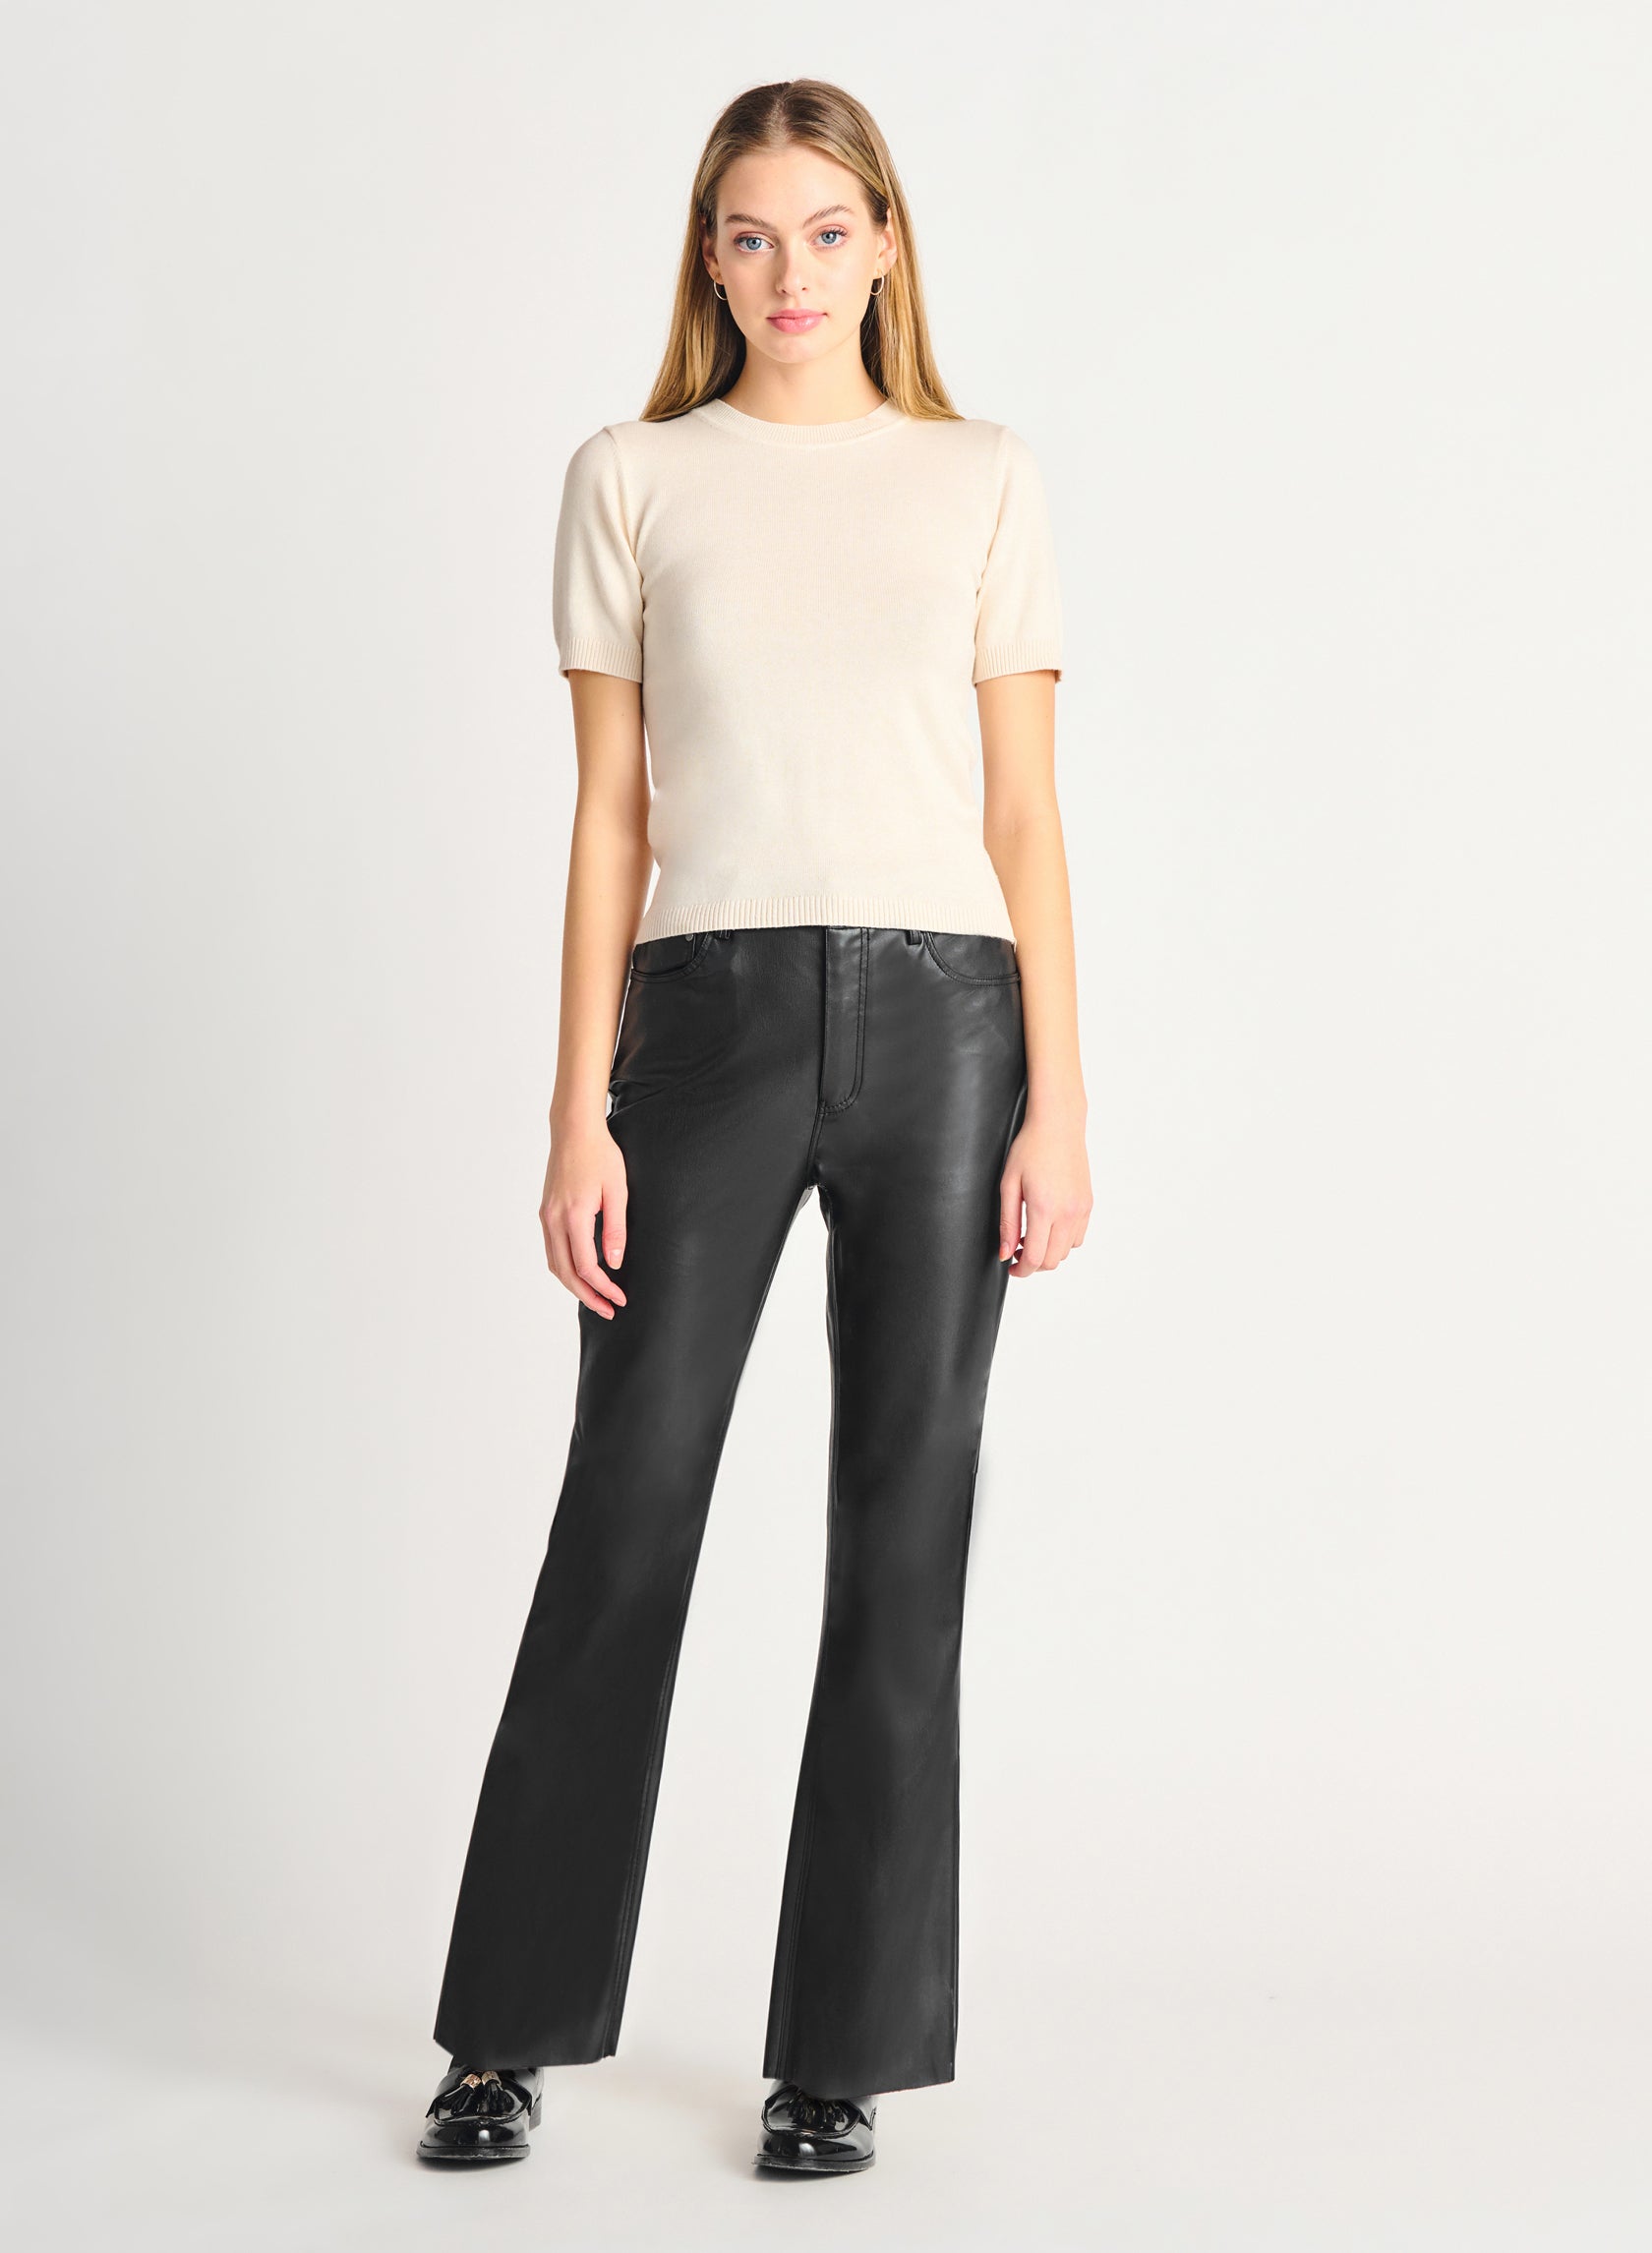 Black Tape Flare Faux Leather Pant